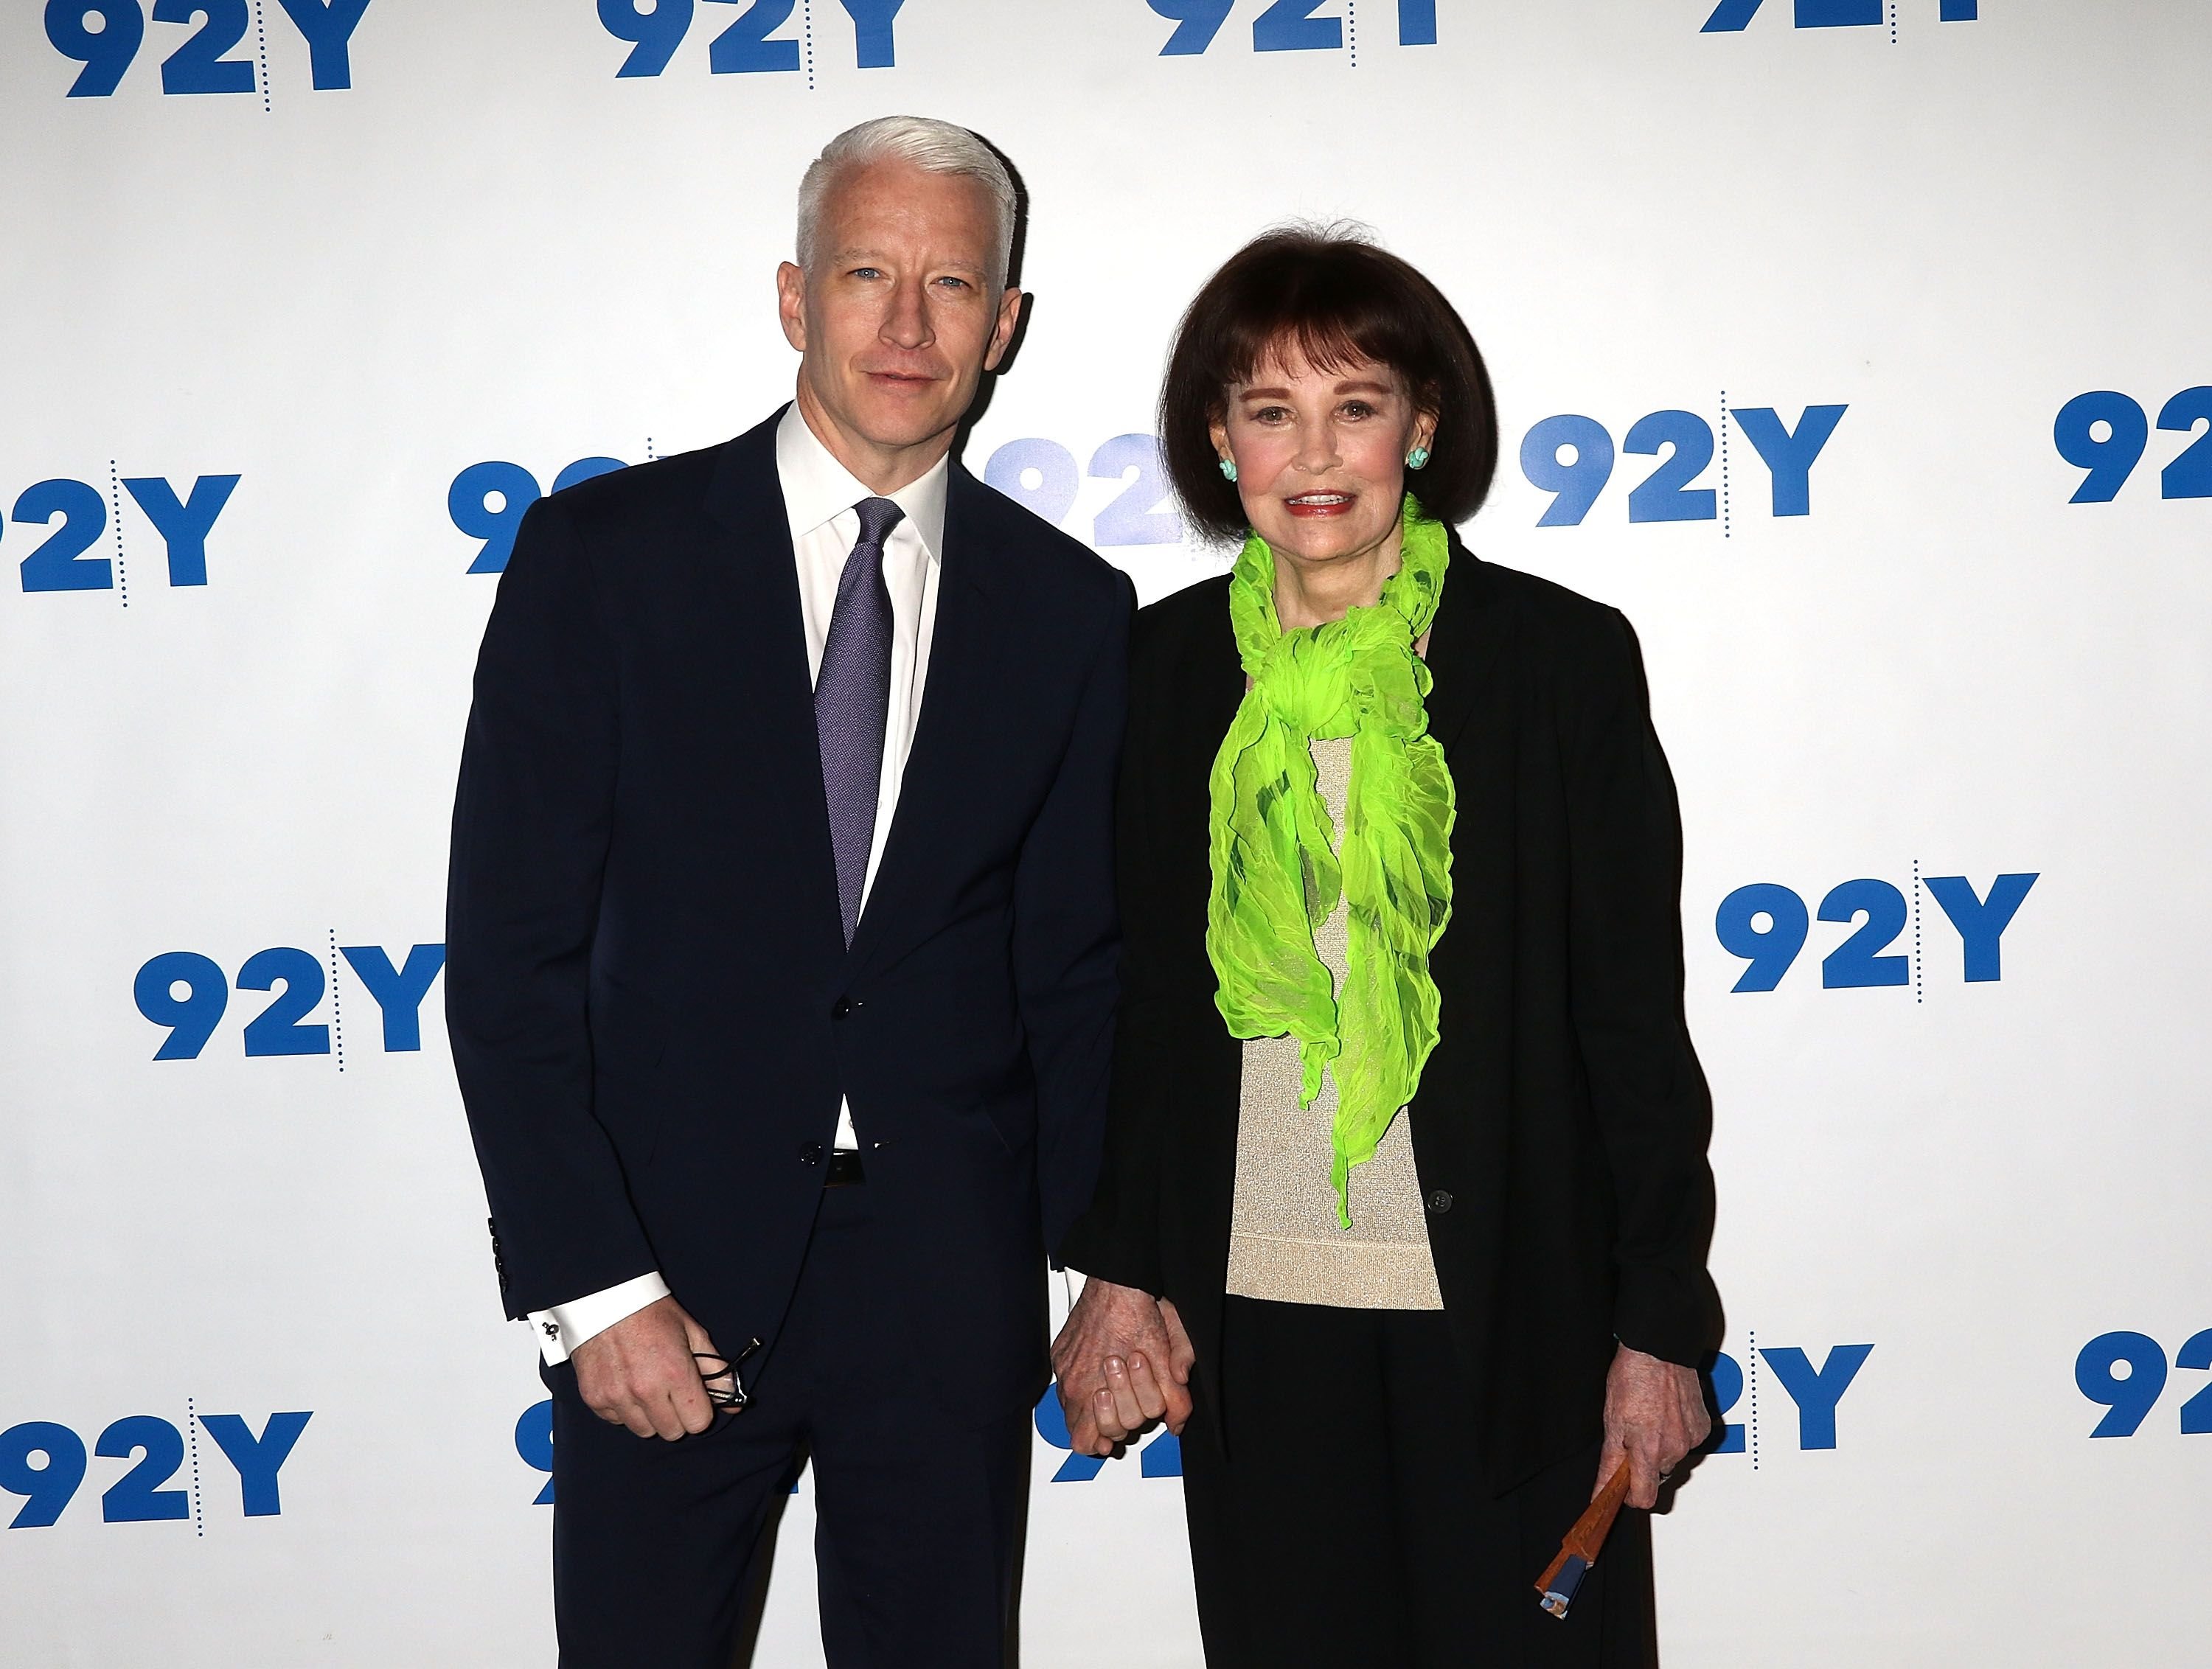 Anderson Cooper and Gloria Vanderbilt at "A Conversation with Anderson Cooper and Gloria Vanderbilt" on April 14, 2016, in New York City | Photo: Laura Cavanaugh/Getty Images